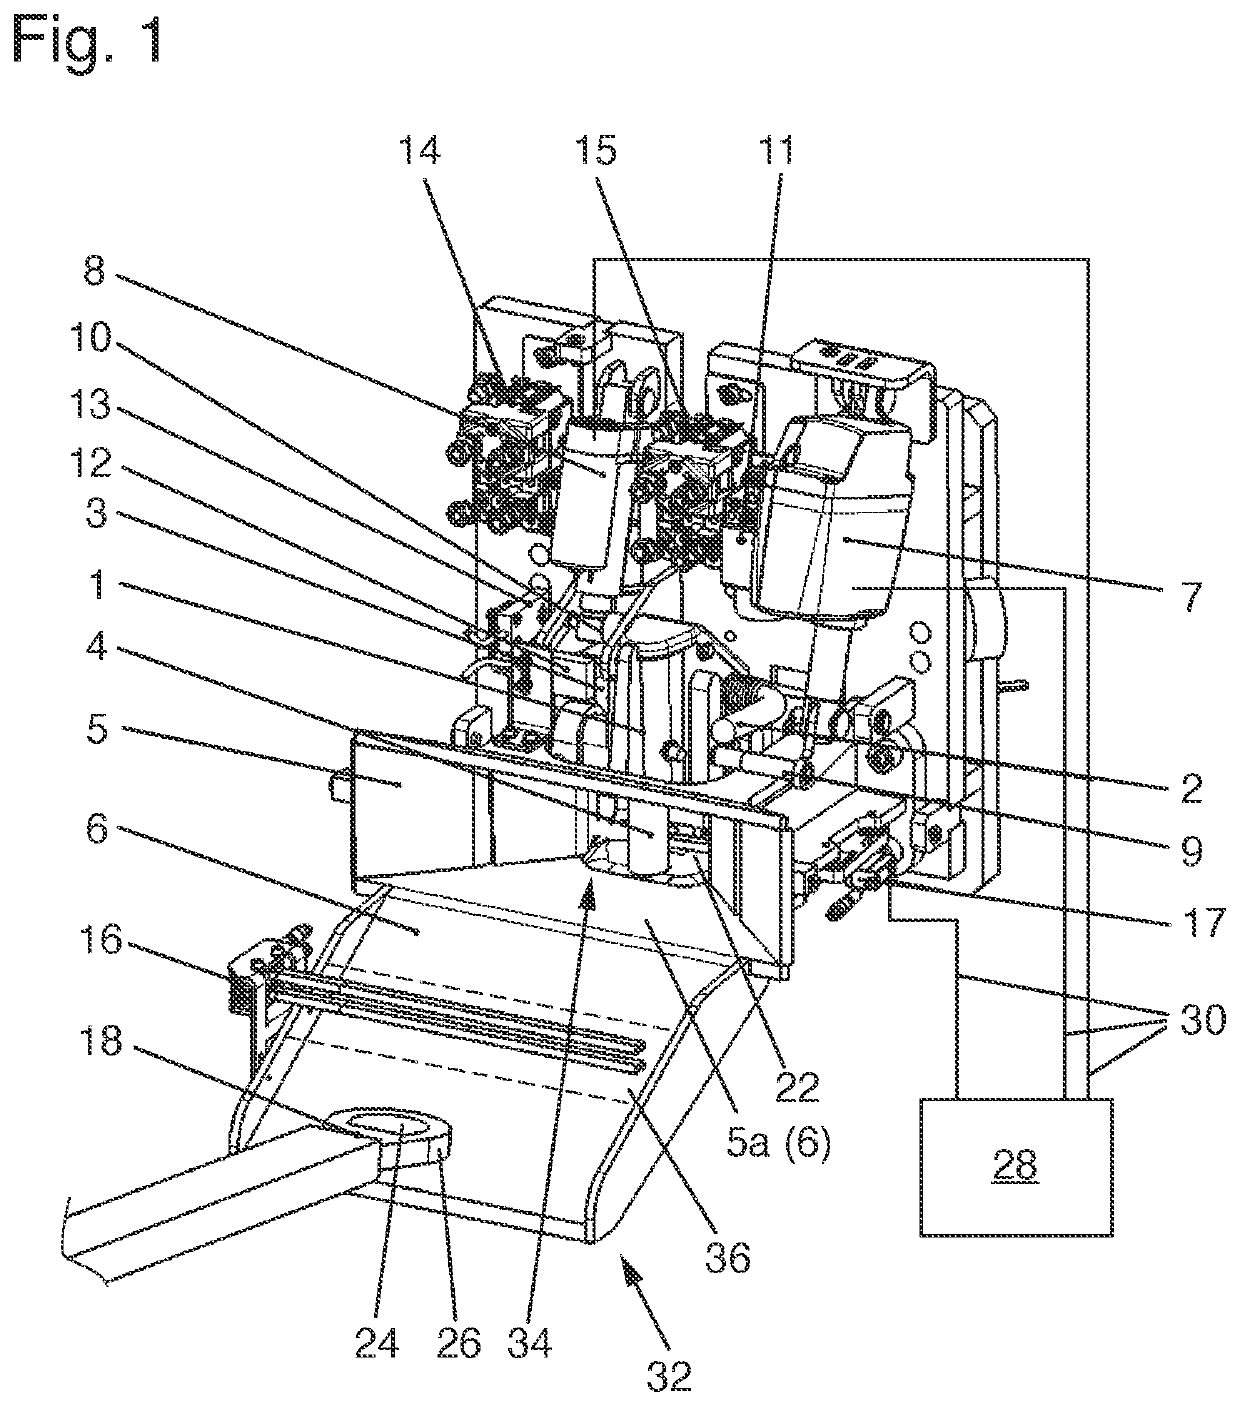 Industrial truck with a jaw coupling, a system including an industrial truck and a trailer, and a method for coupling a trailer to an industrial truck